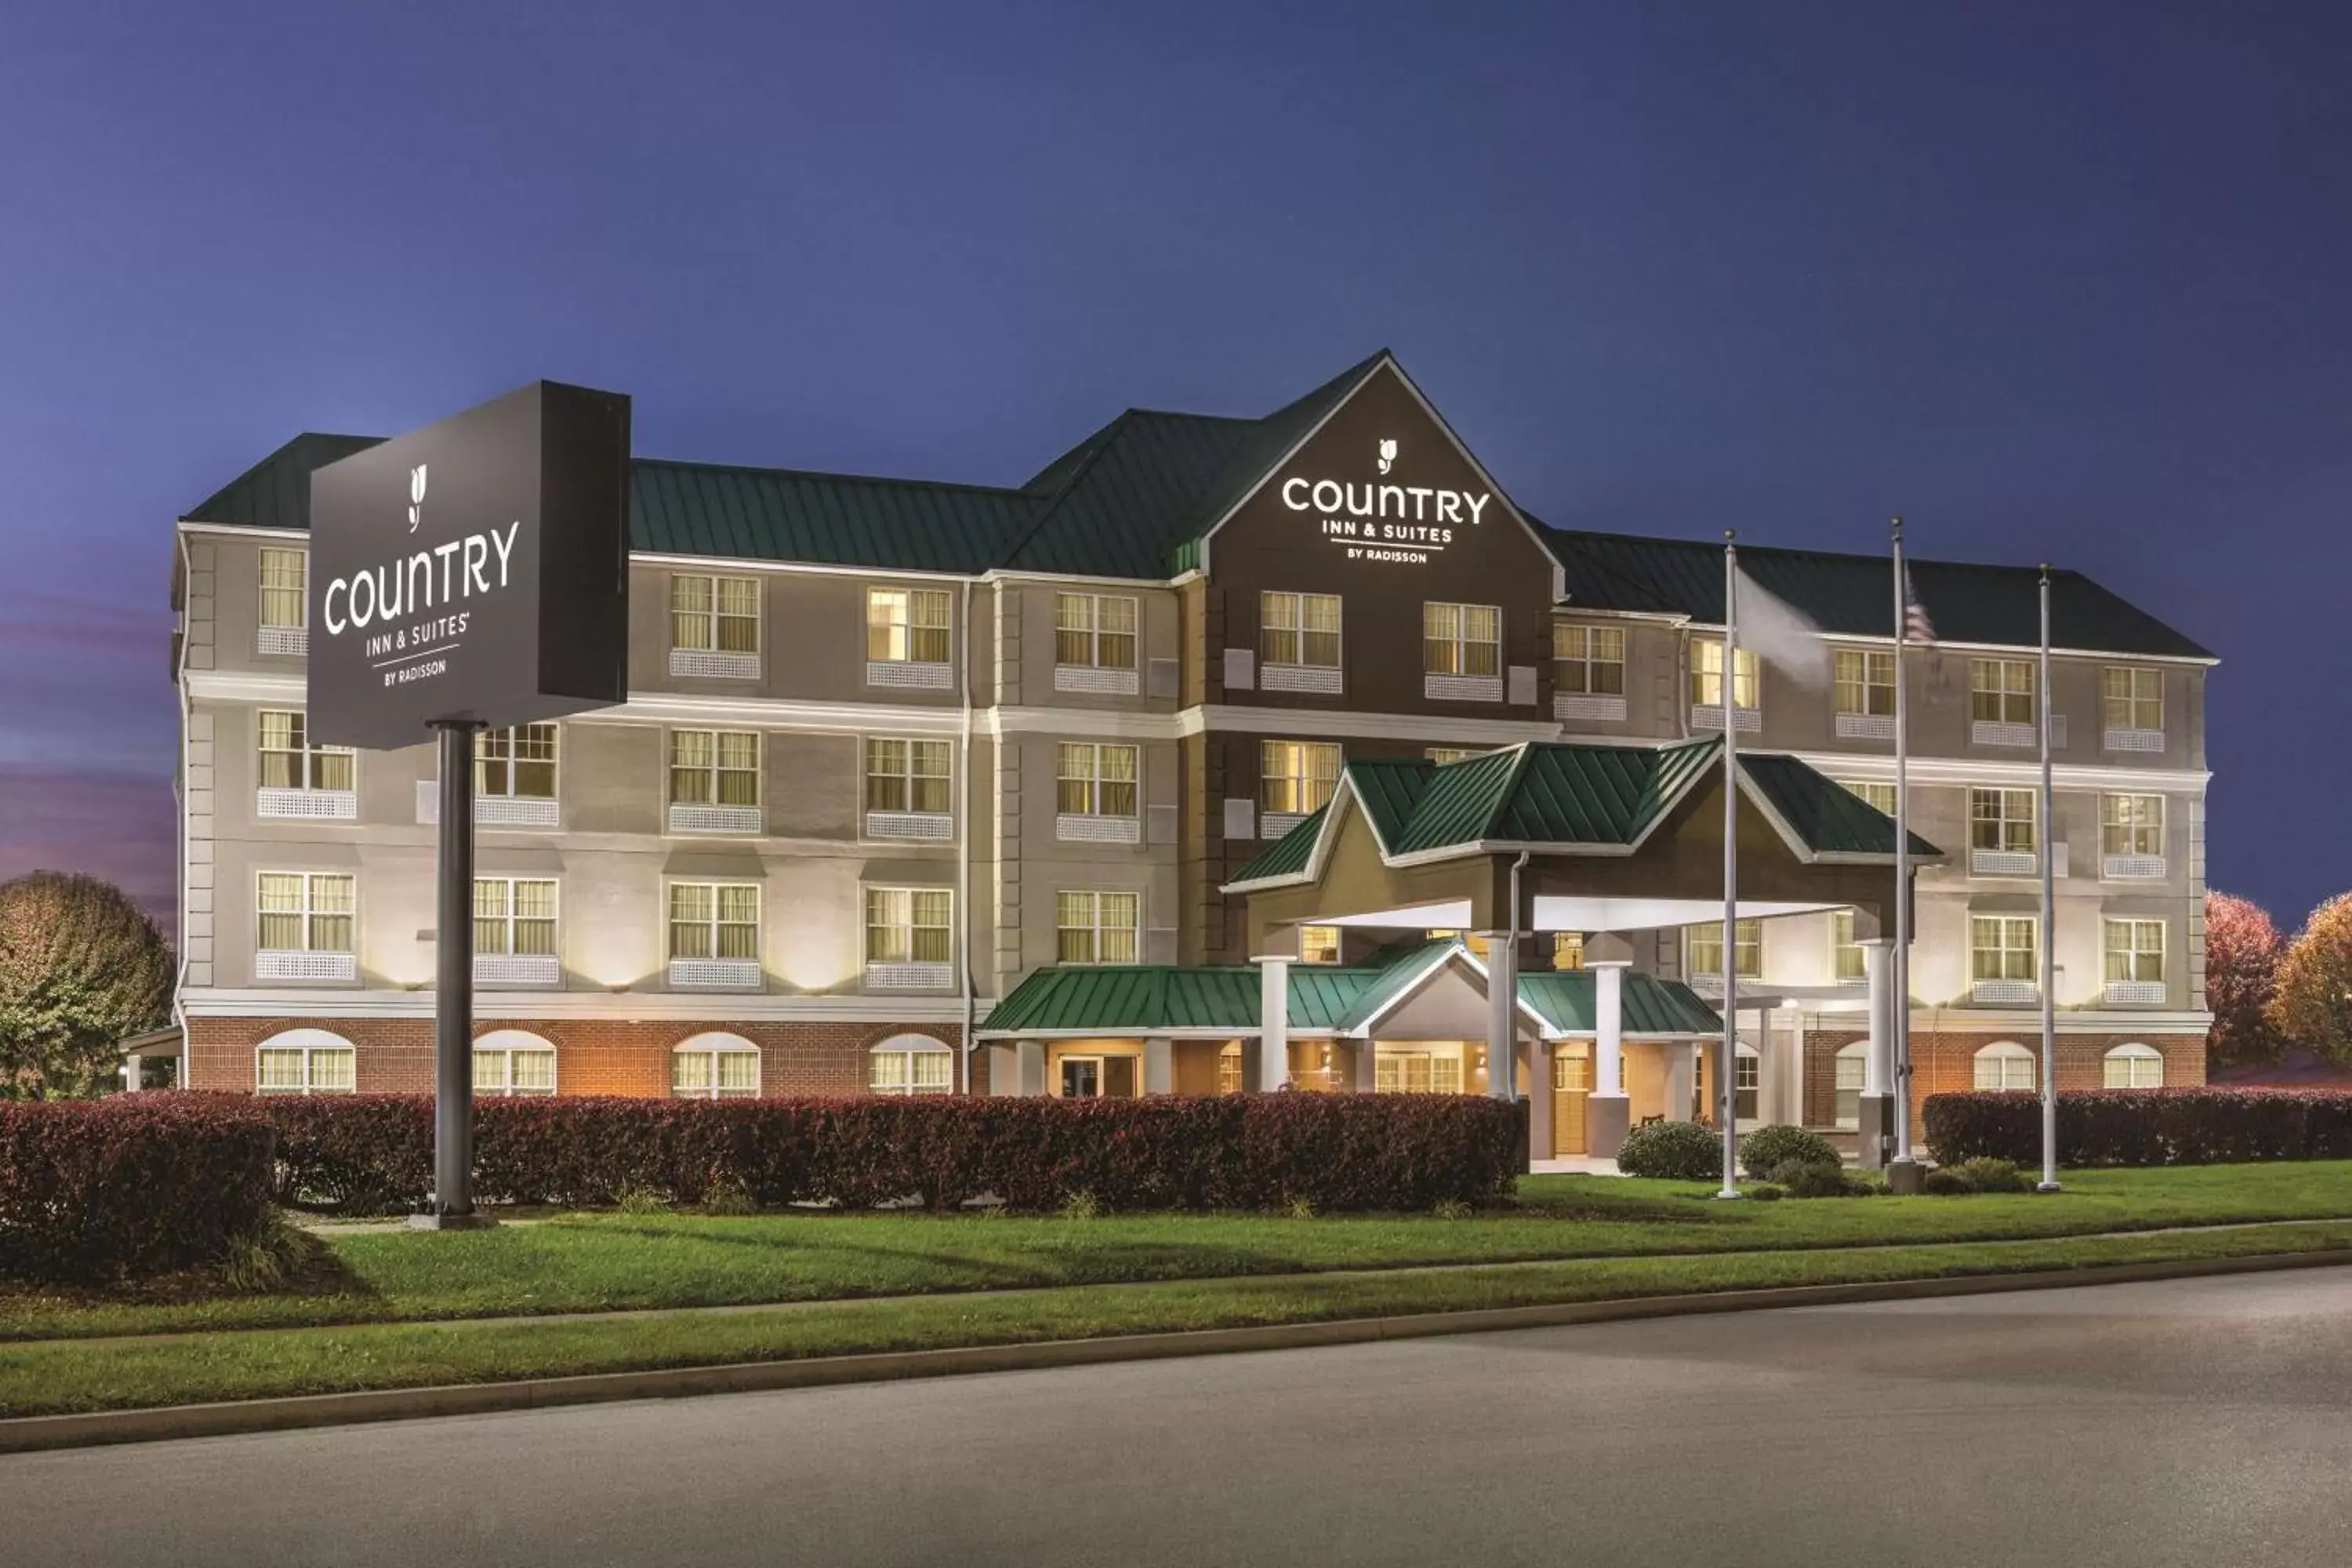 Property Building in Country Inn & Suites by Radisson, Georgetown, KY